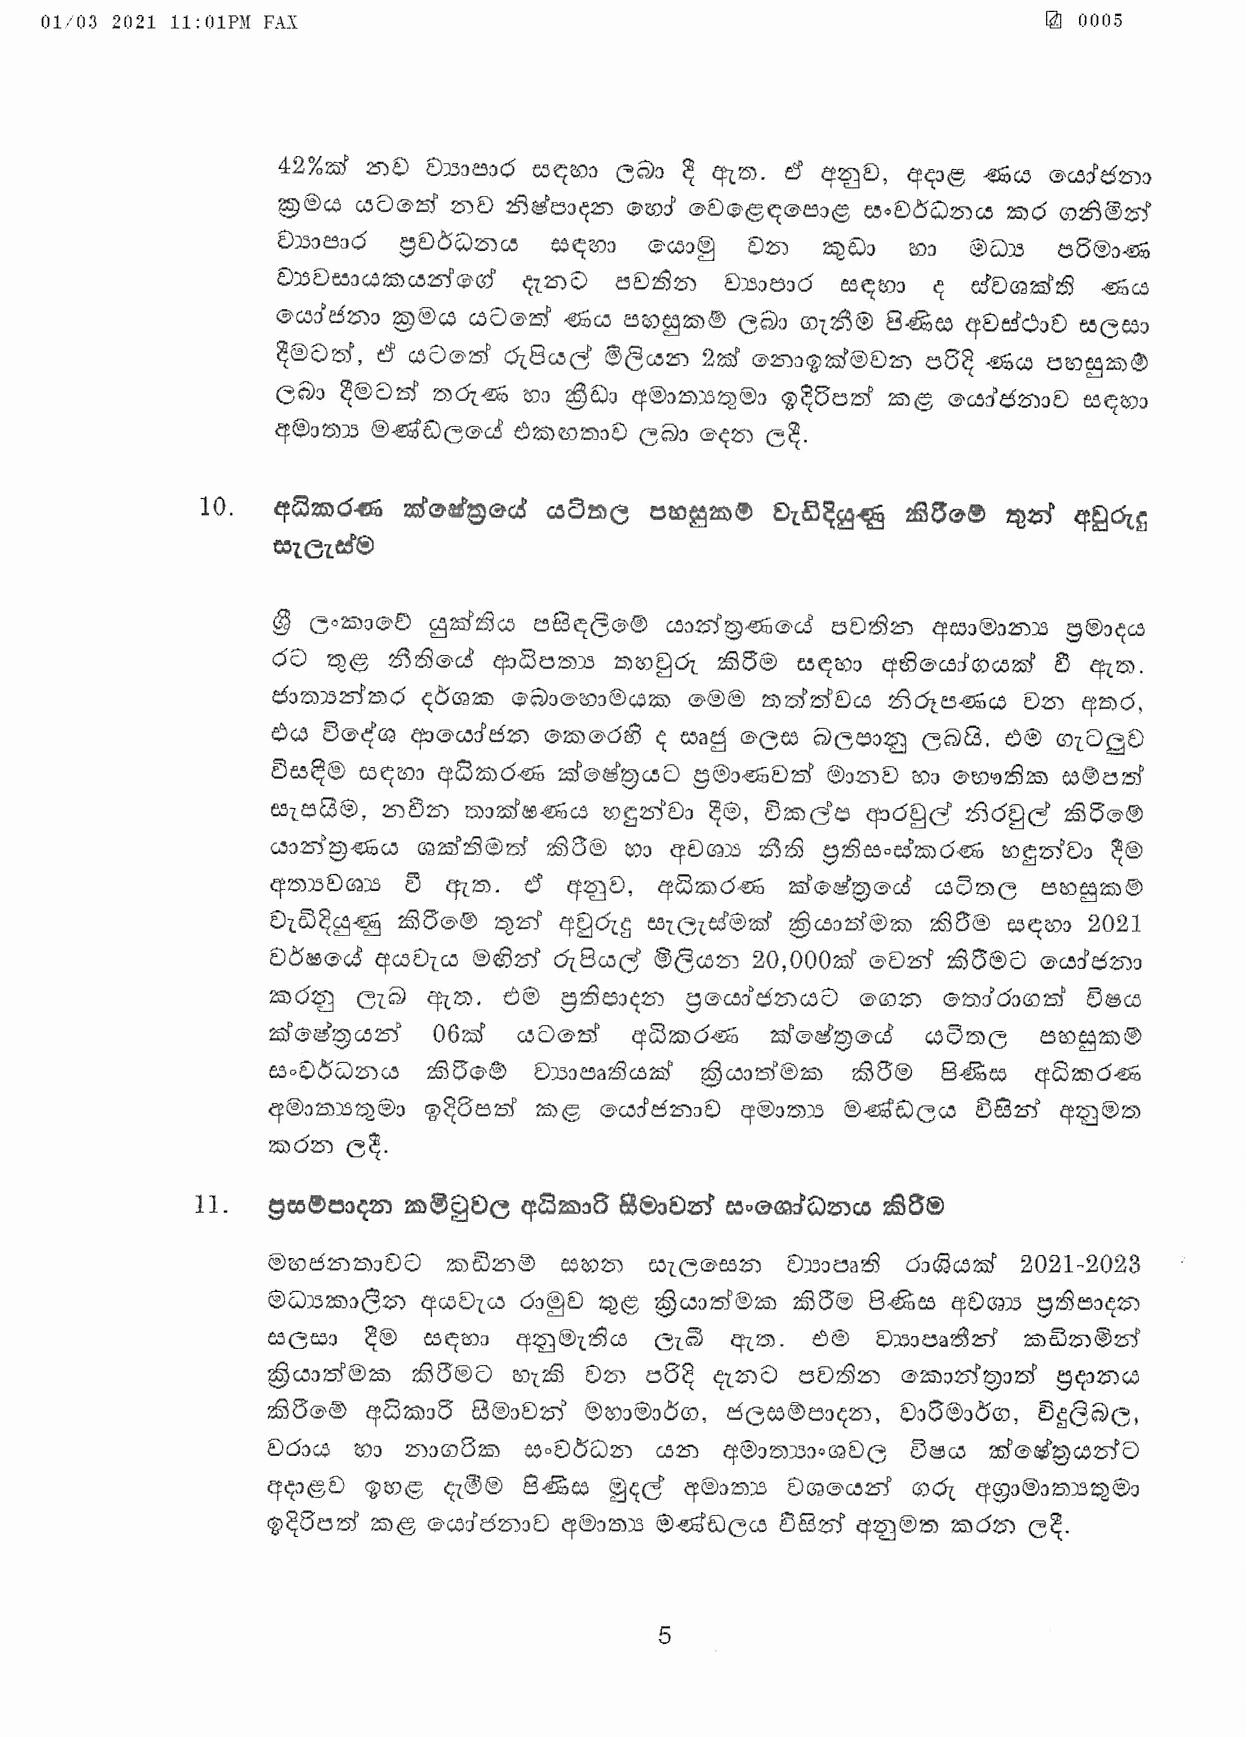 Cabinet Decision on 01.03.2021 page 005